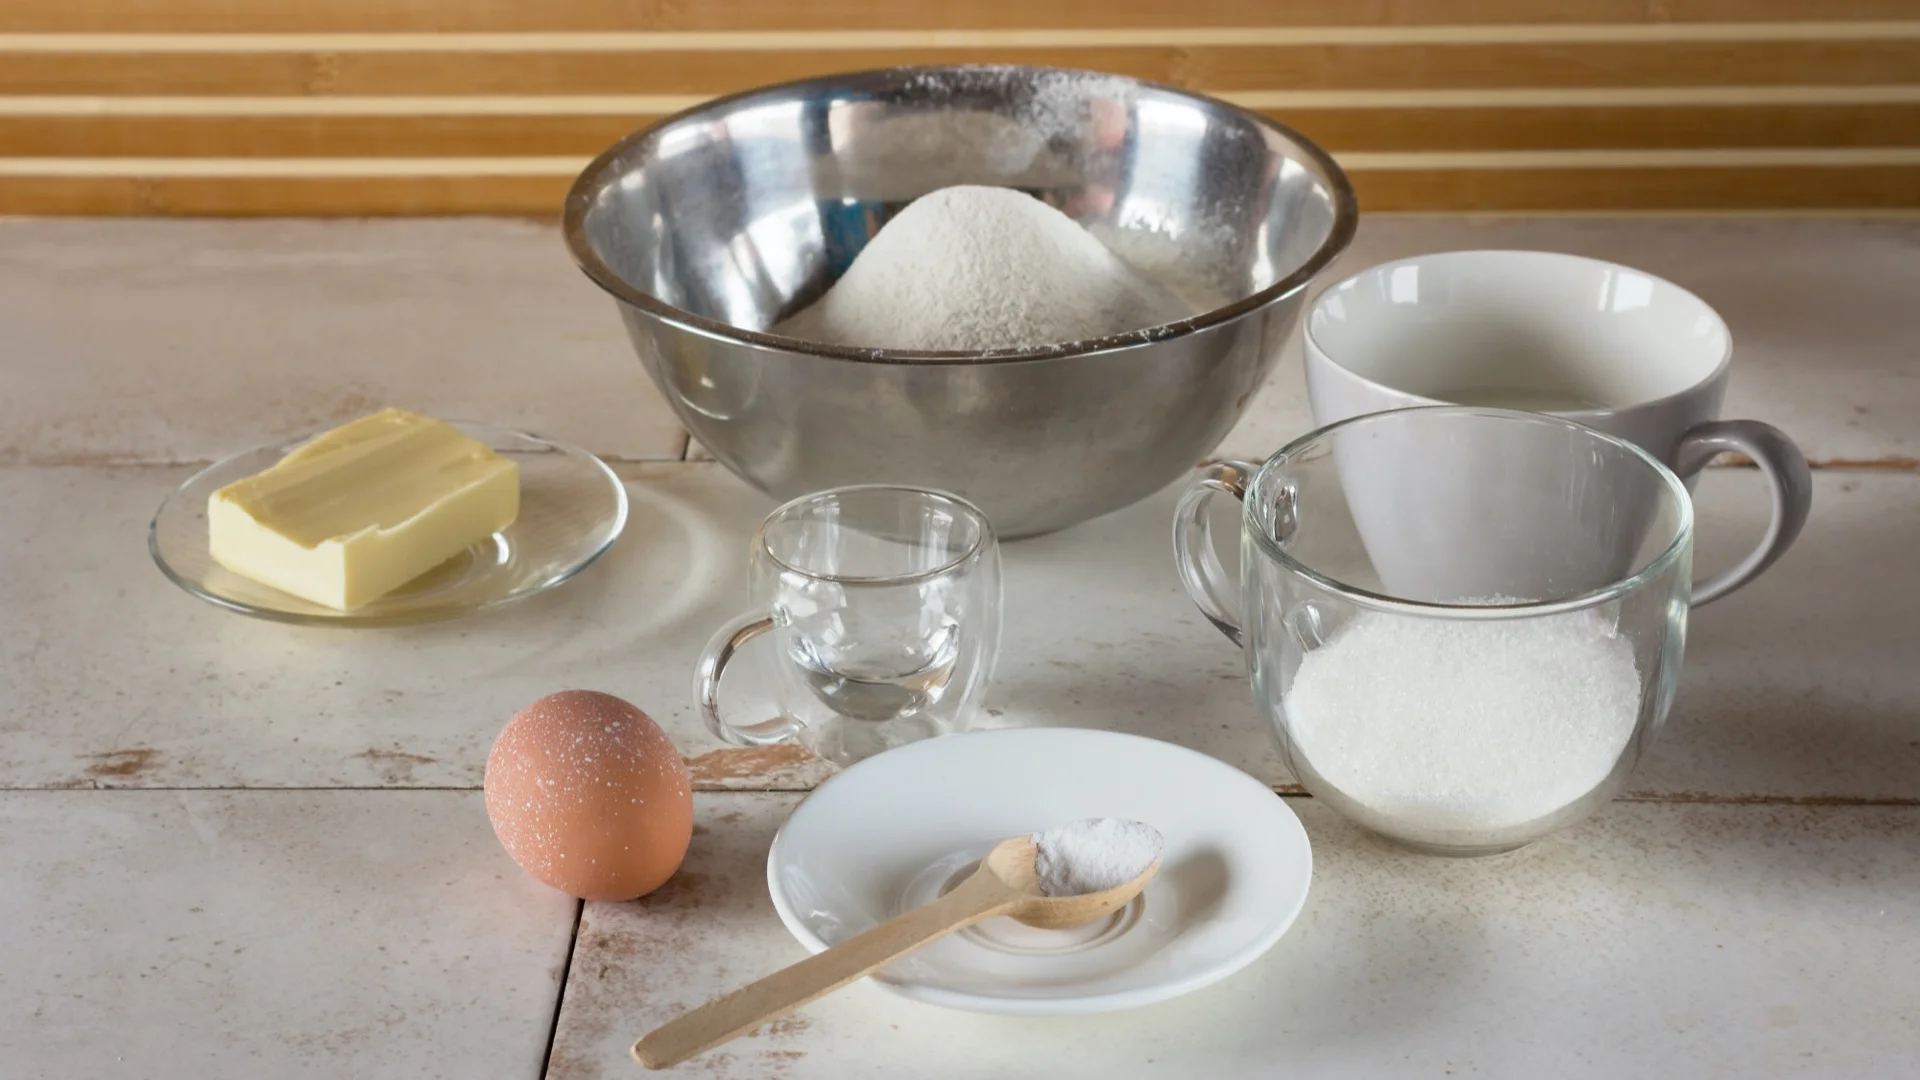 1/6th cup (8 tsp) Perfect for precise measurement of baking ingredients.